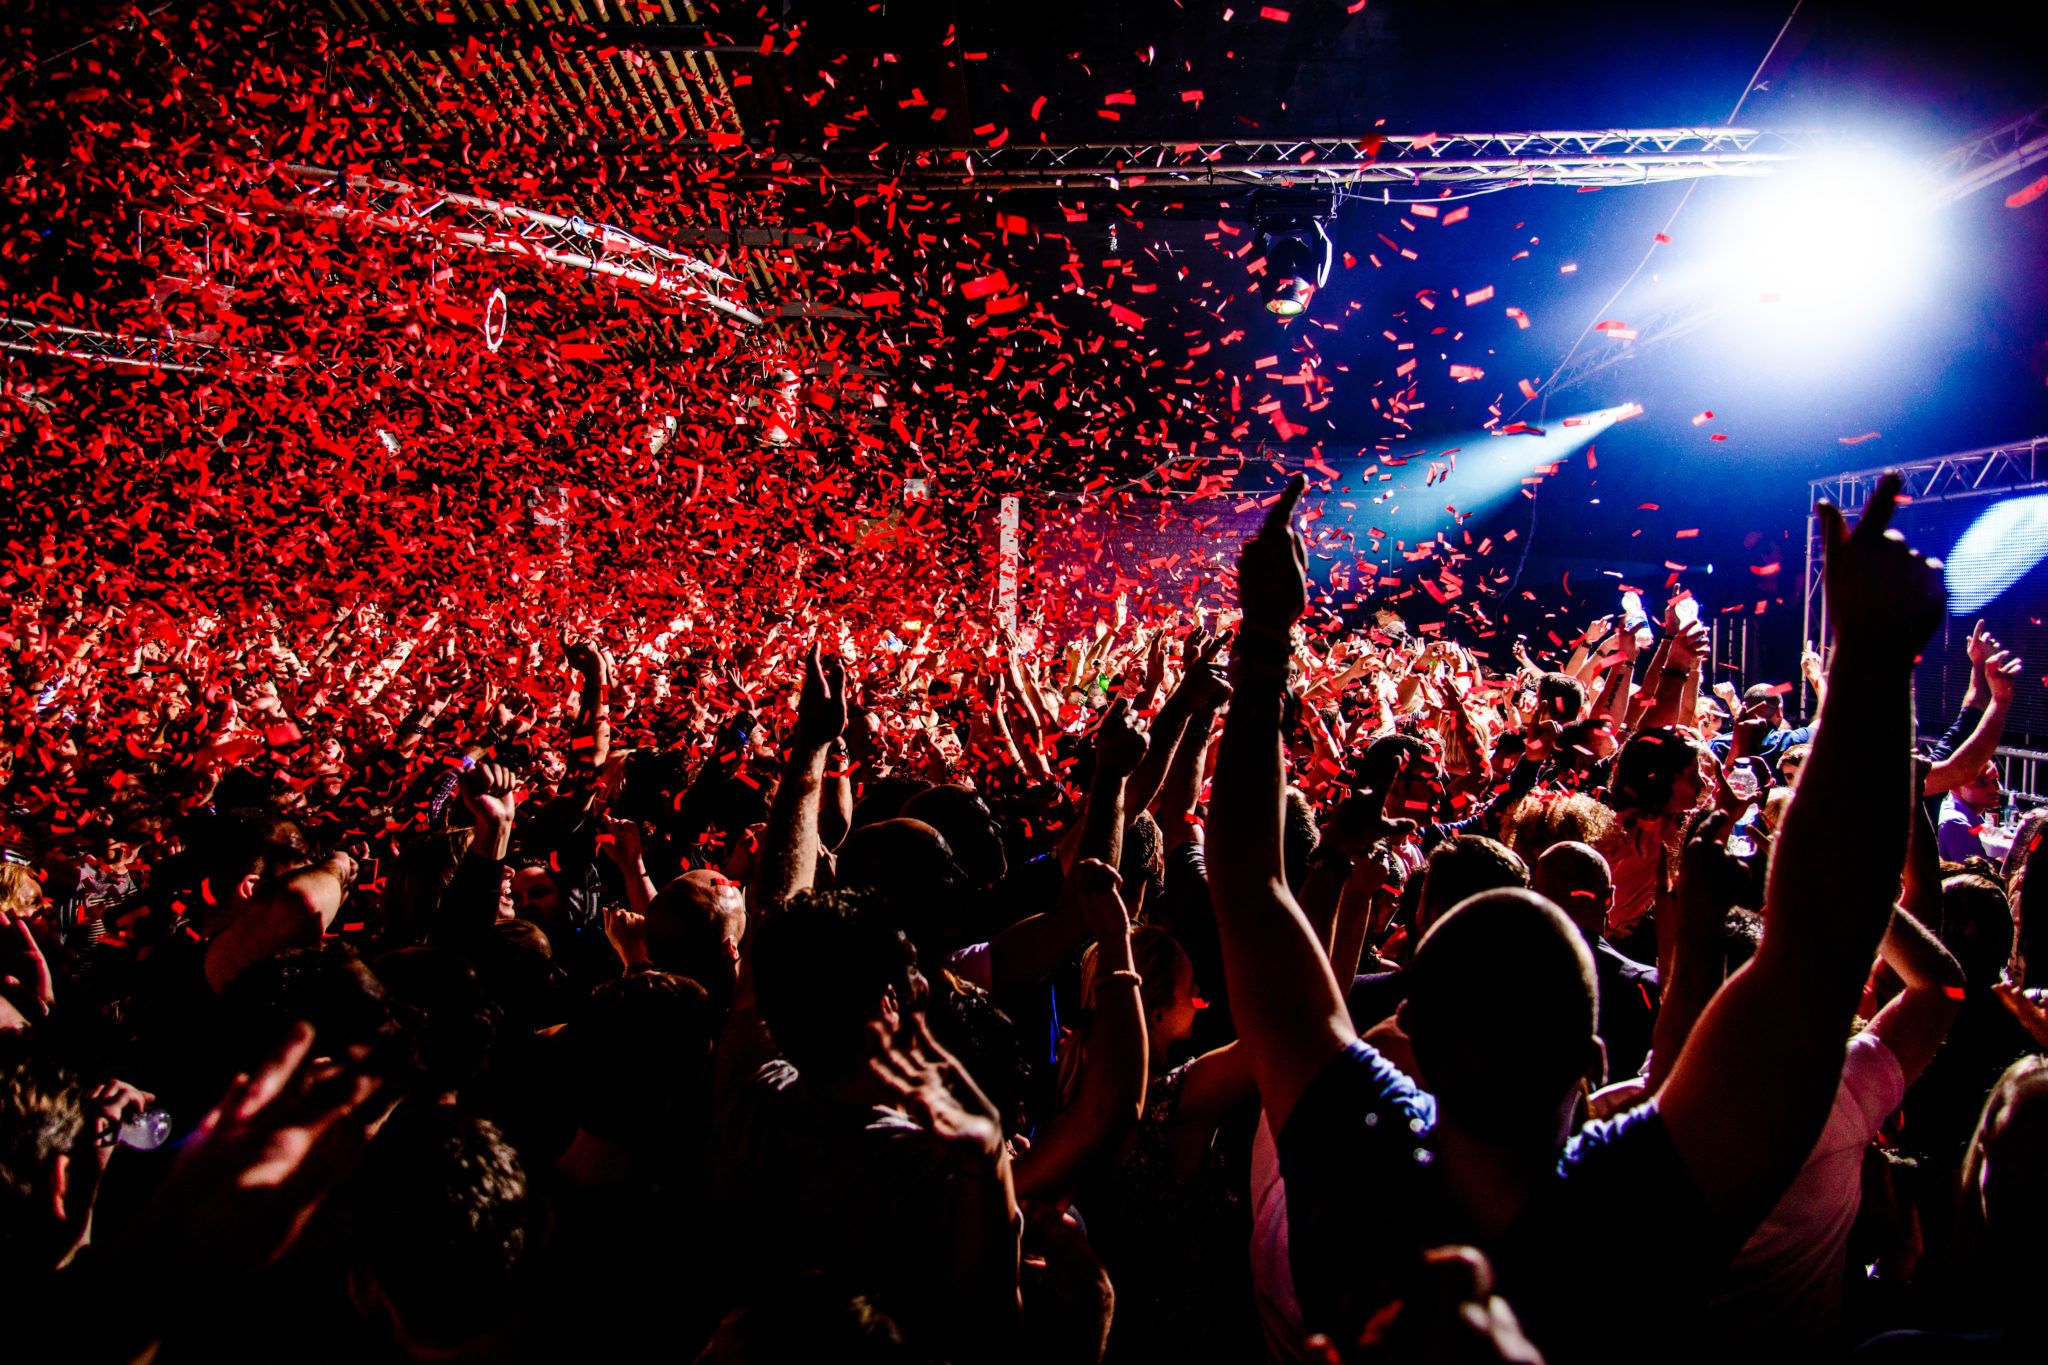 Interior of a nightclub, red confetti falling from the sky